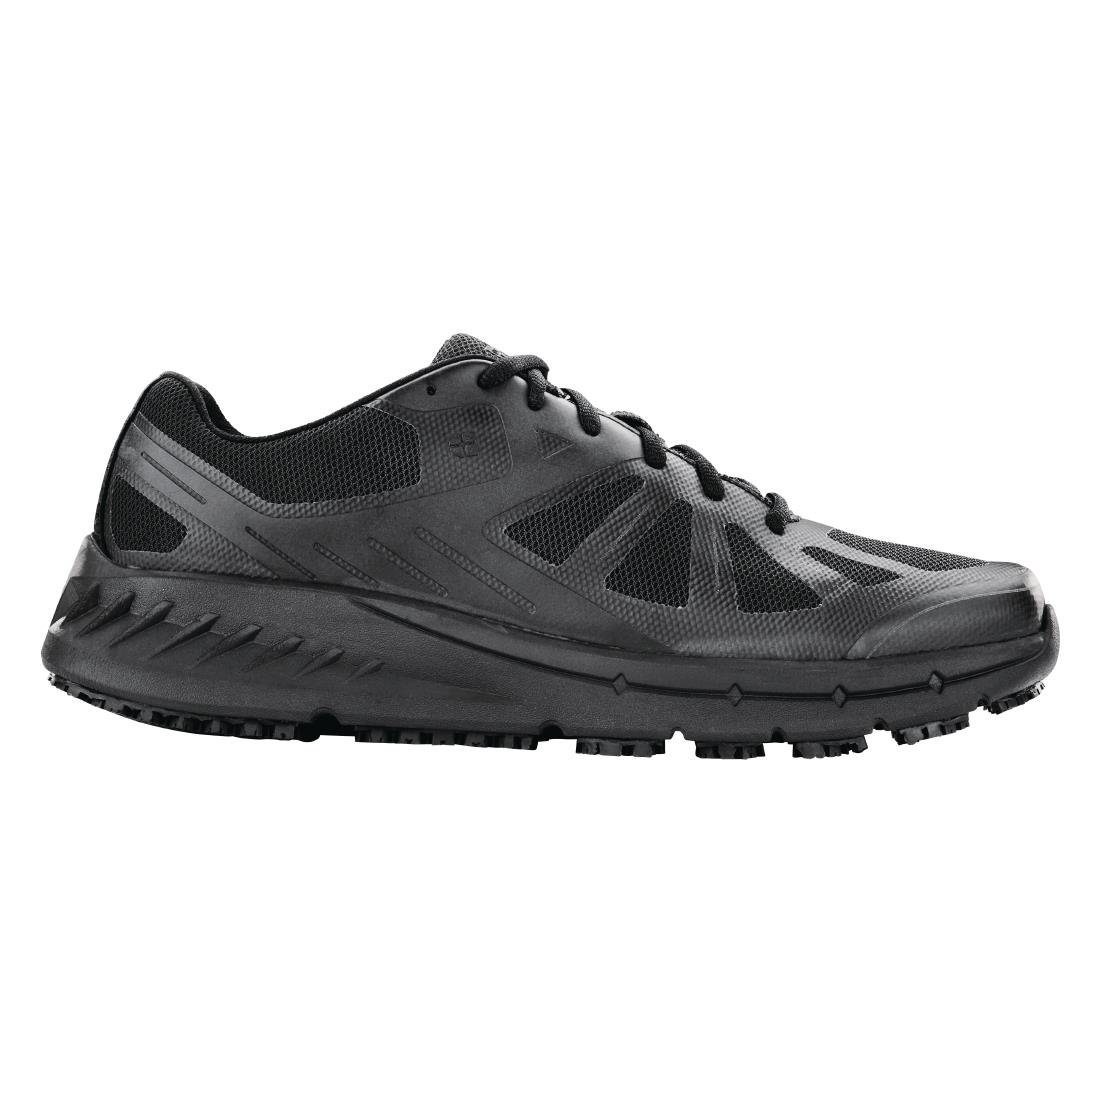 BB599-42 Shoes for Crews Endurance Trainers Black Size 42